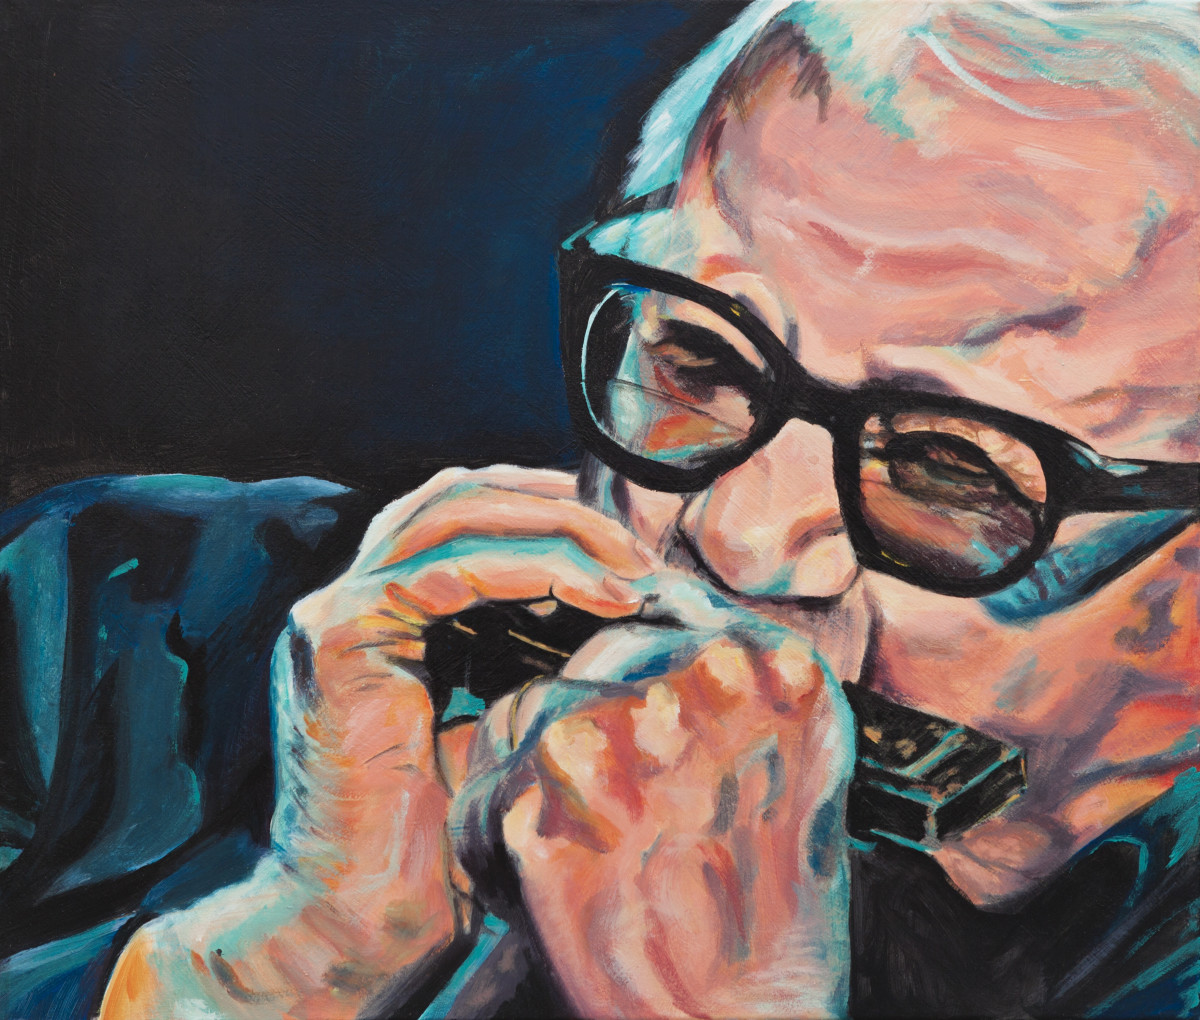 The Sound - Toots Thielemans by Nicky Myny 